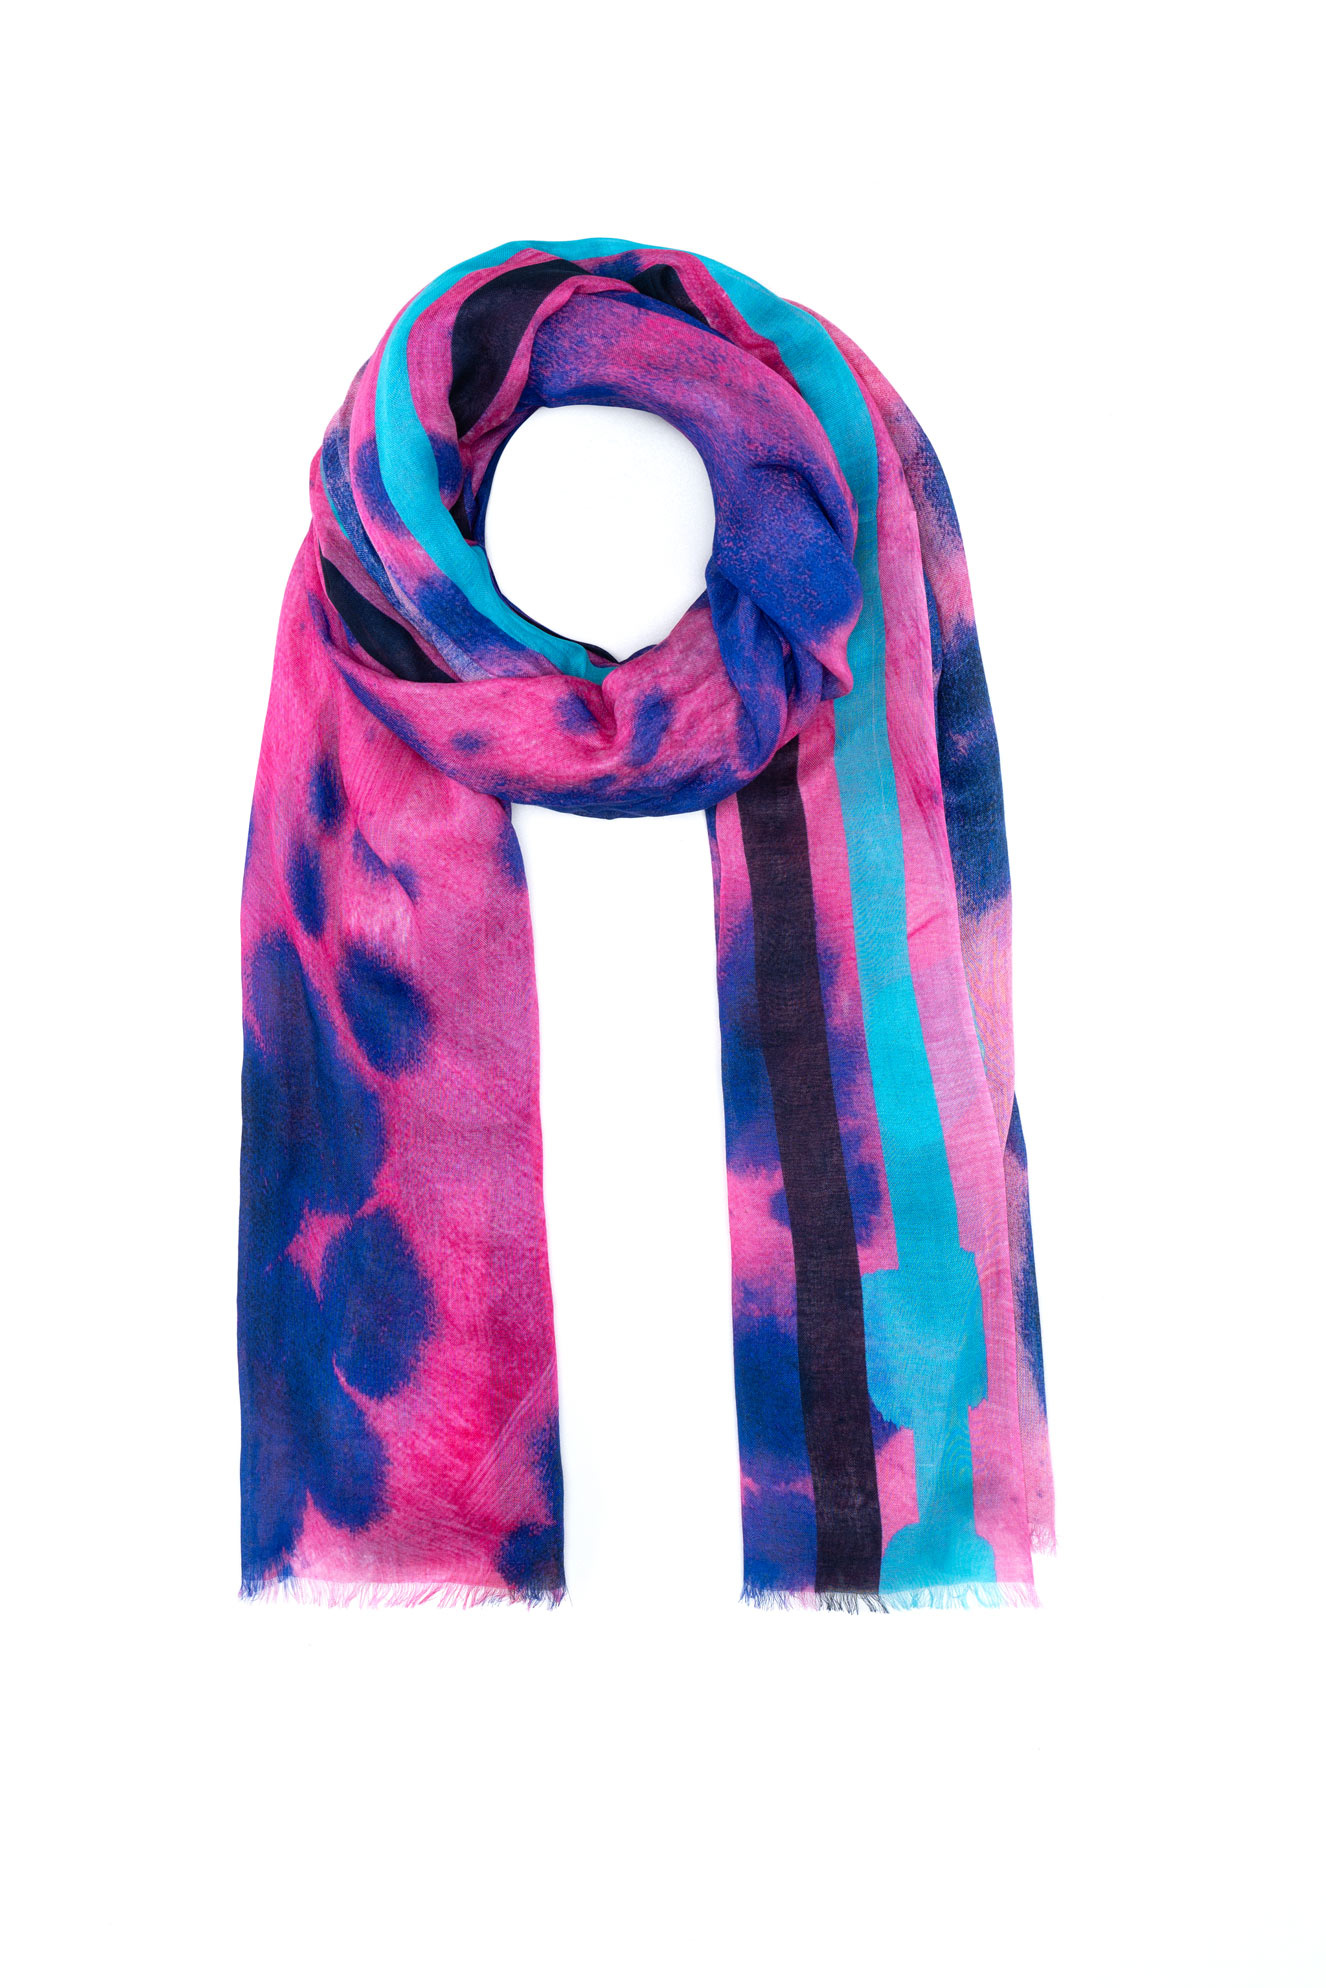 91118_woven_print_scarf_winter_abstract_tied.jpg